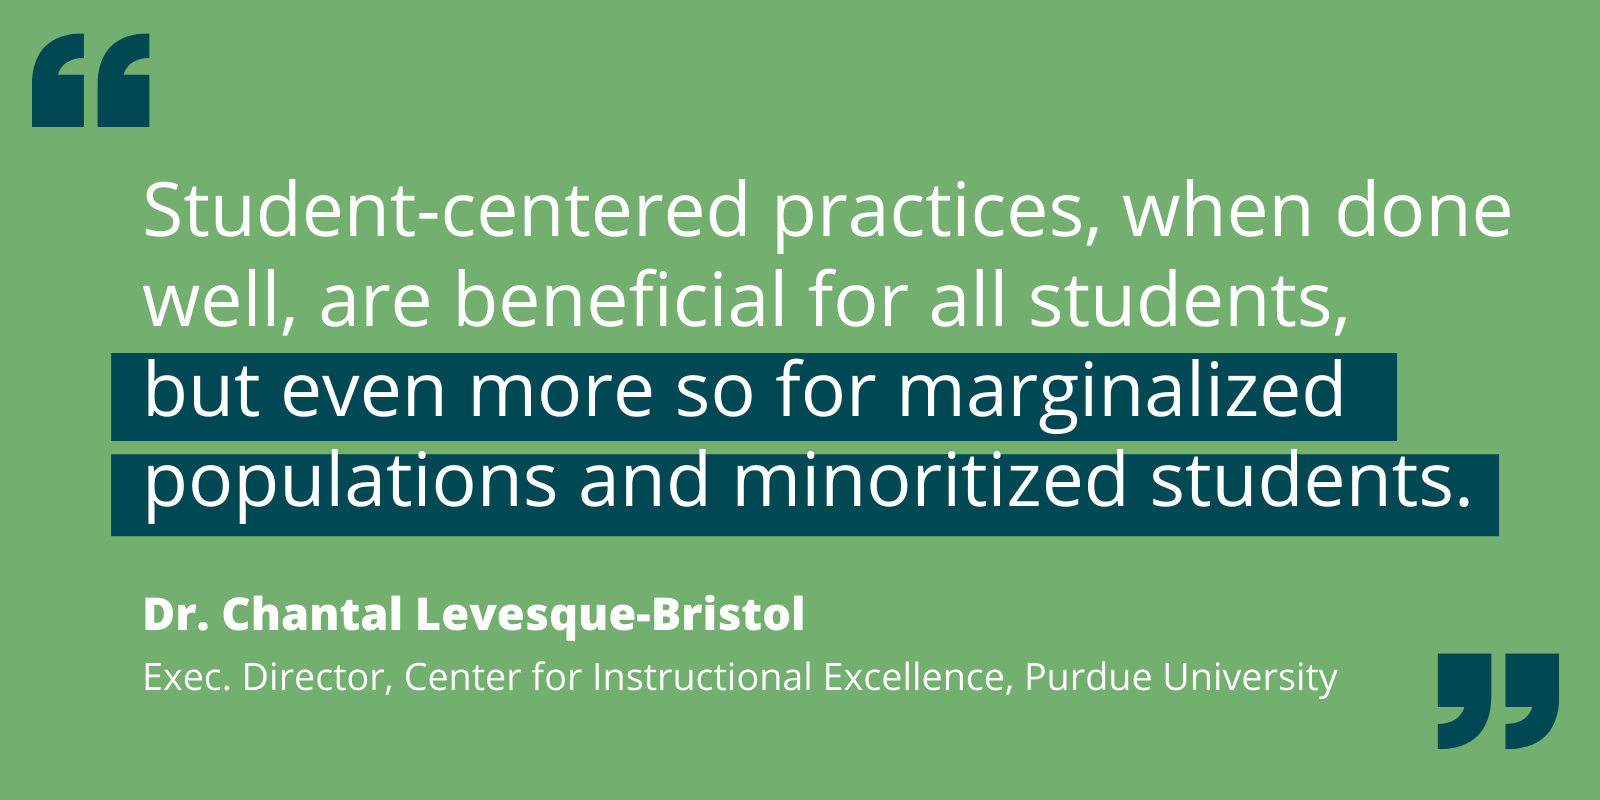 Quote by Chantal Levesque-Bristol re student-centered practices benefitting marginalized and minoritized students.